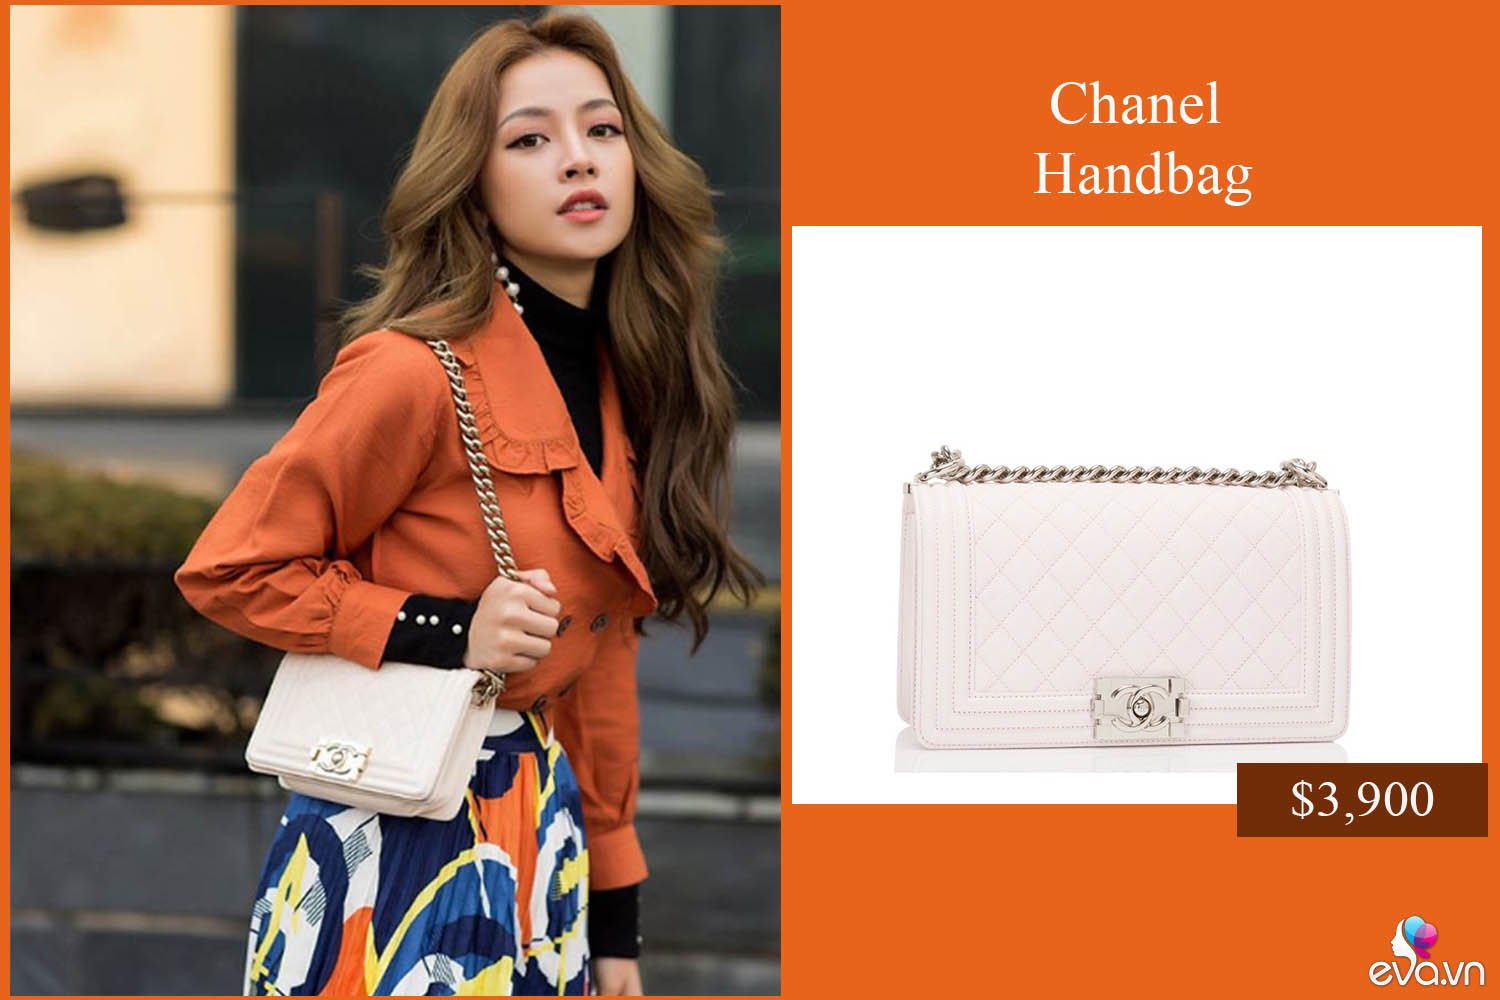 han quoc co jennie, viet nam co chi pu tham vong tro thanh “quy co chanel” - 11